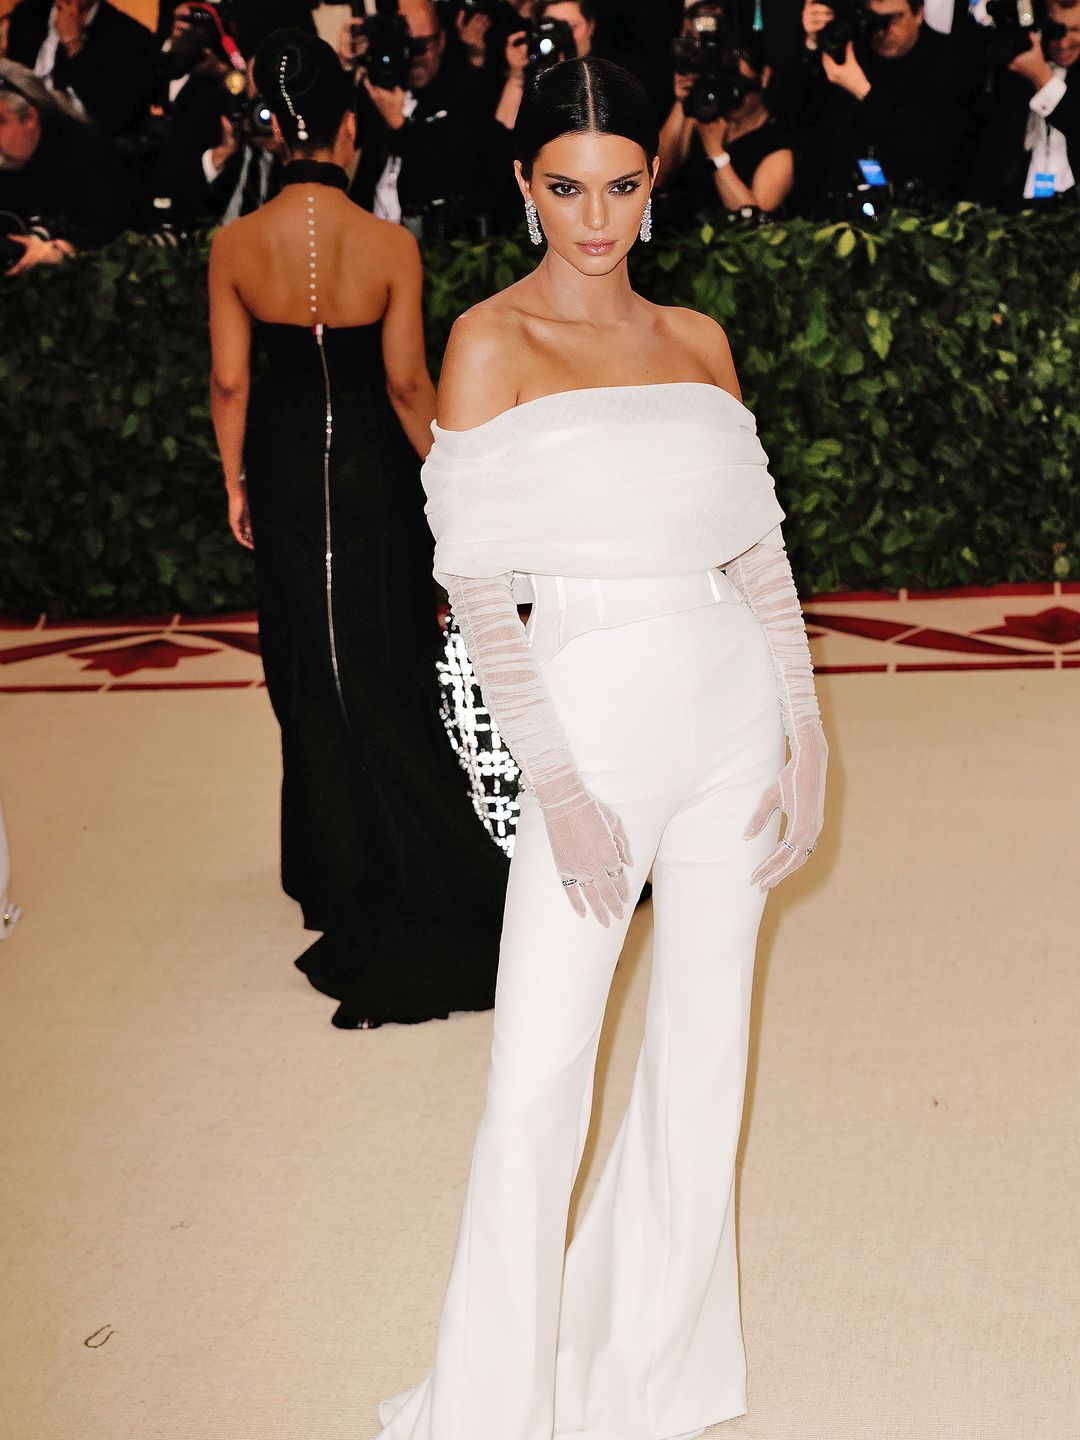 Kendall Jenner attends Heavenly Bodies: Fashion & The Catholic Imagination Met Gala 